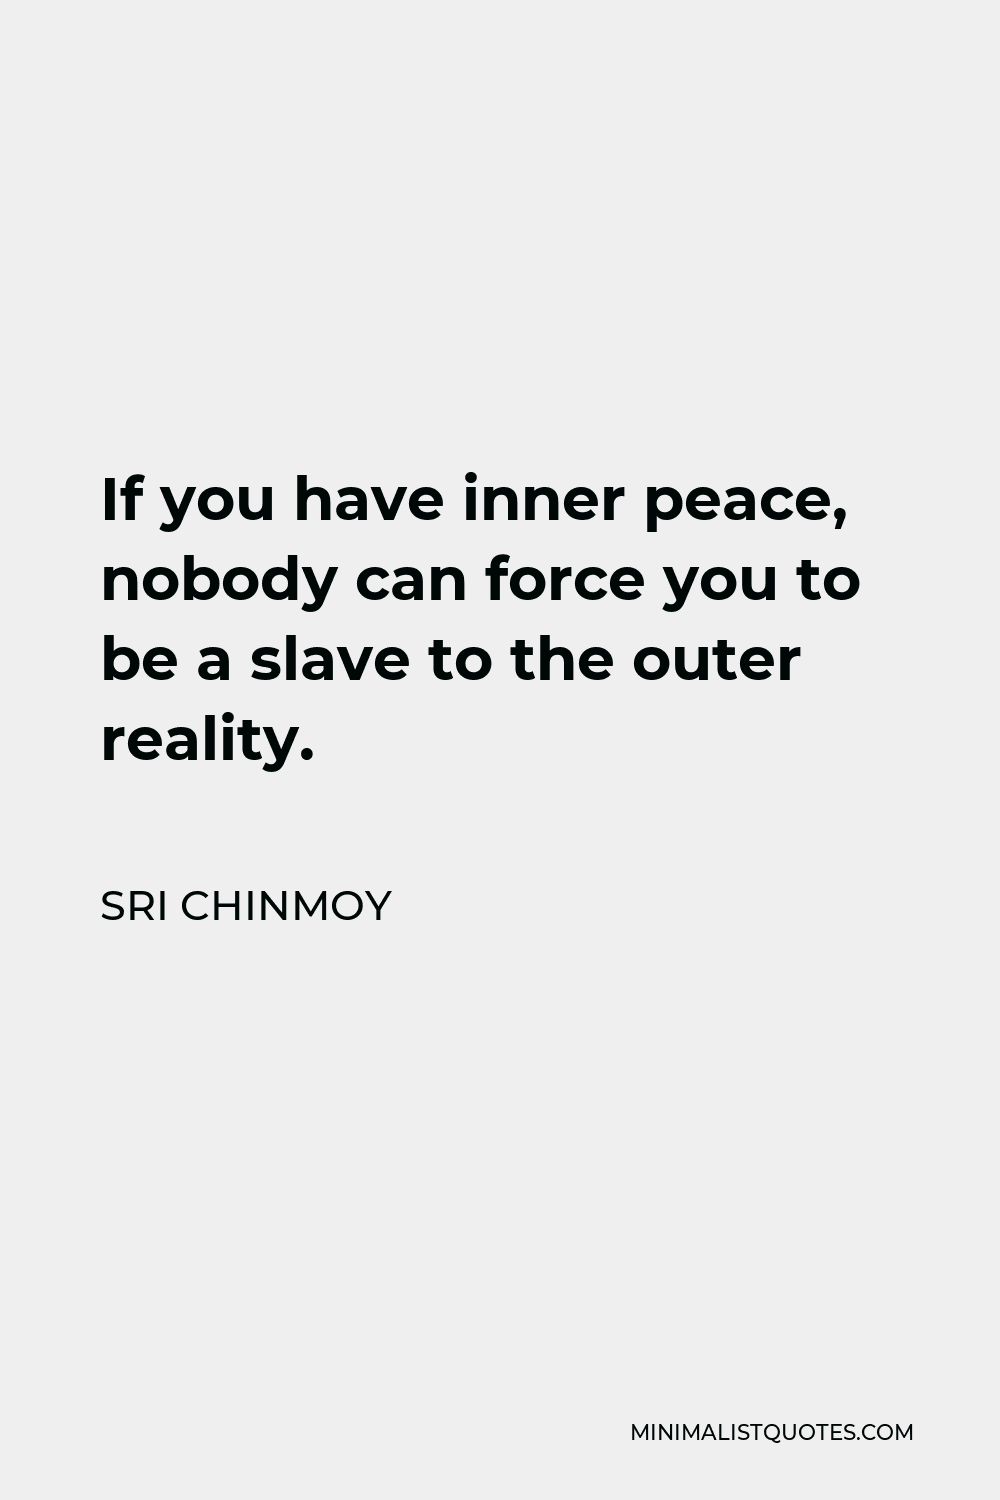 Sri Chinmoy Quote - If you have inner peace, nobody can force you to be a slave to the outer reality.